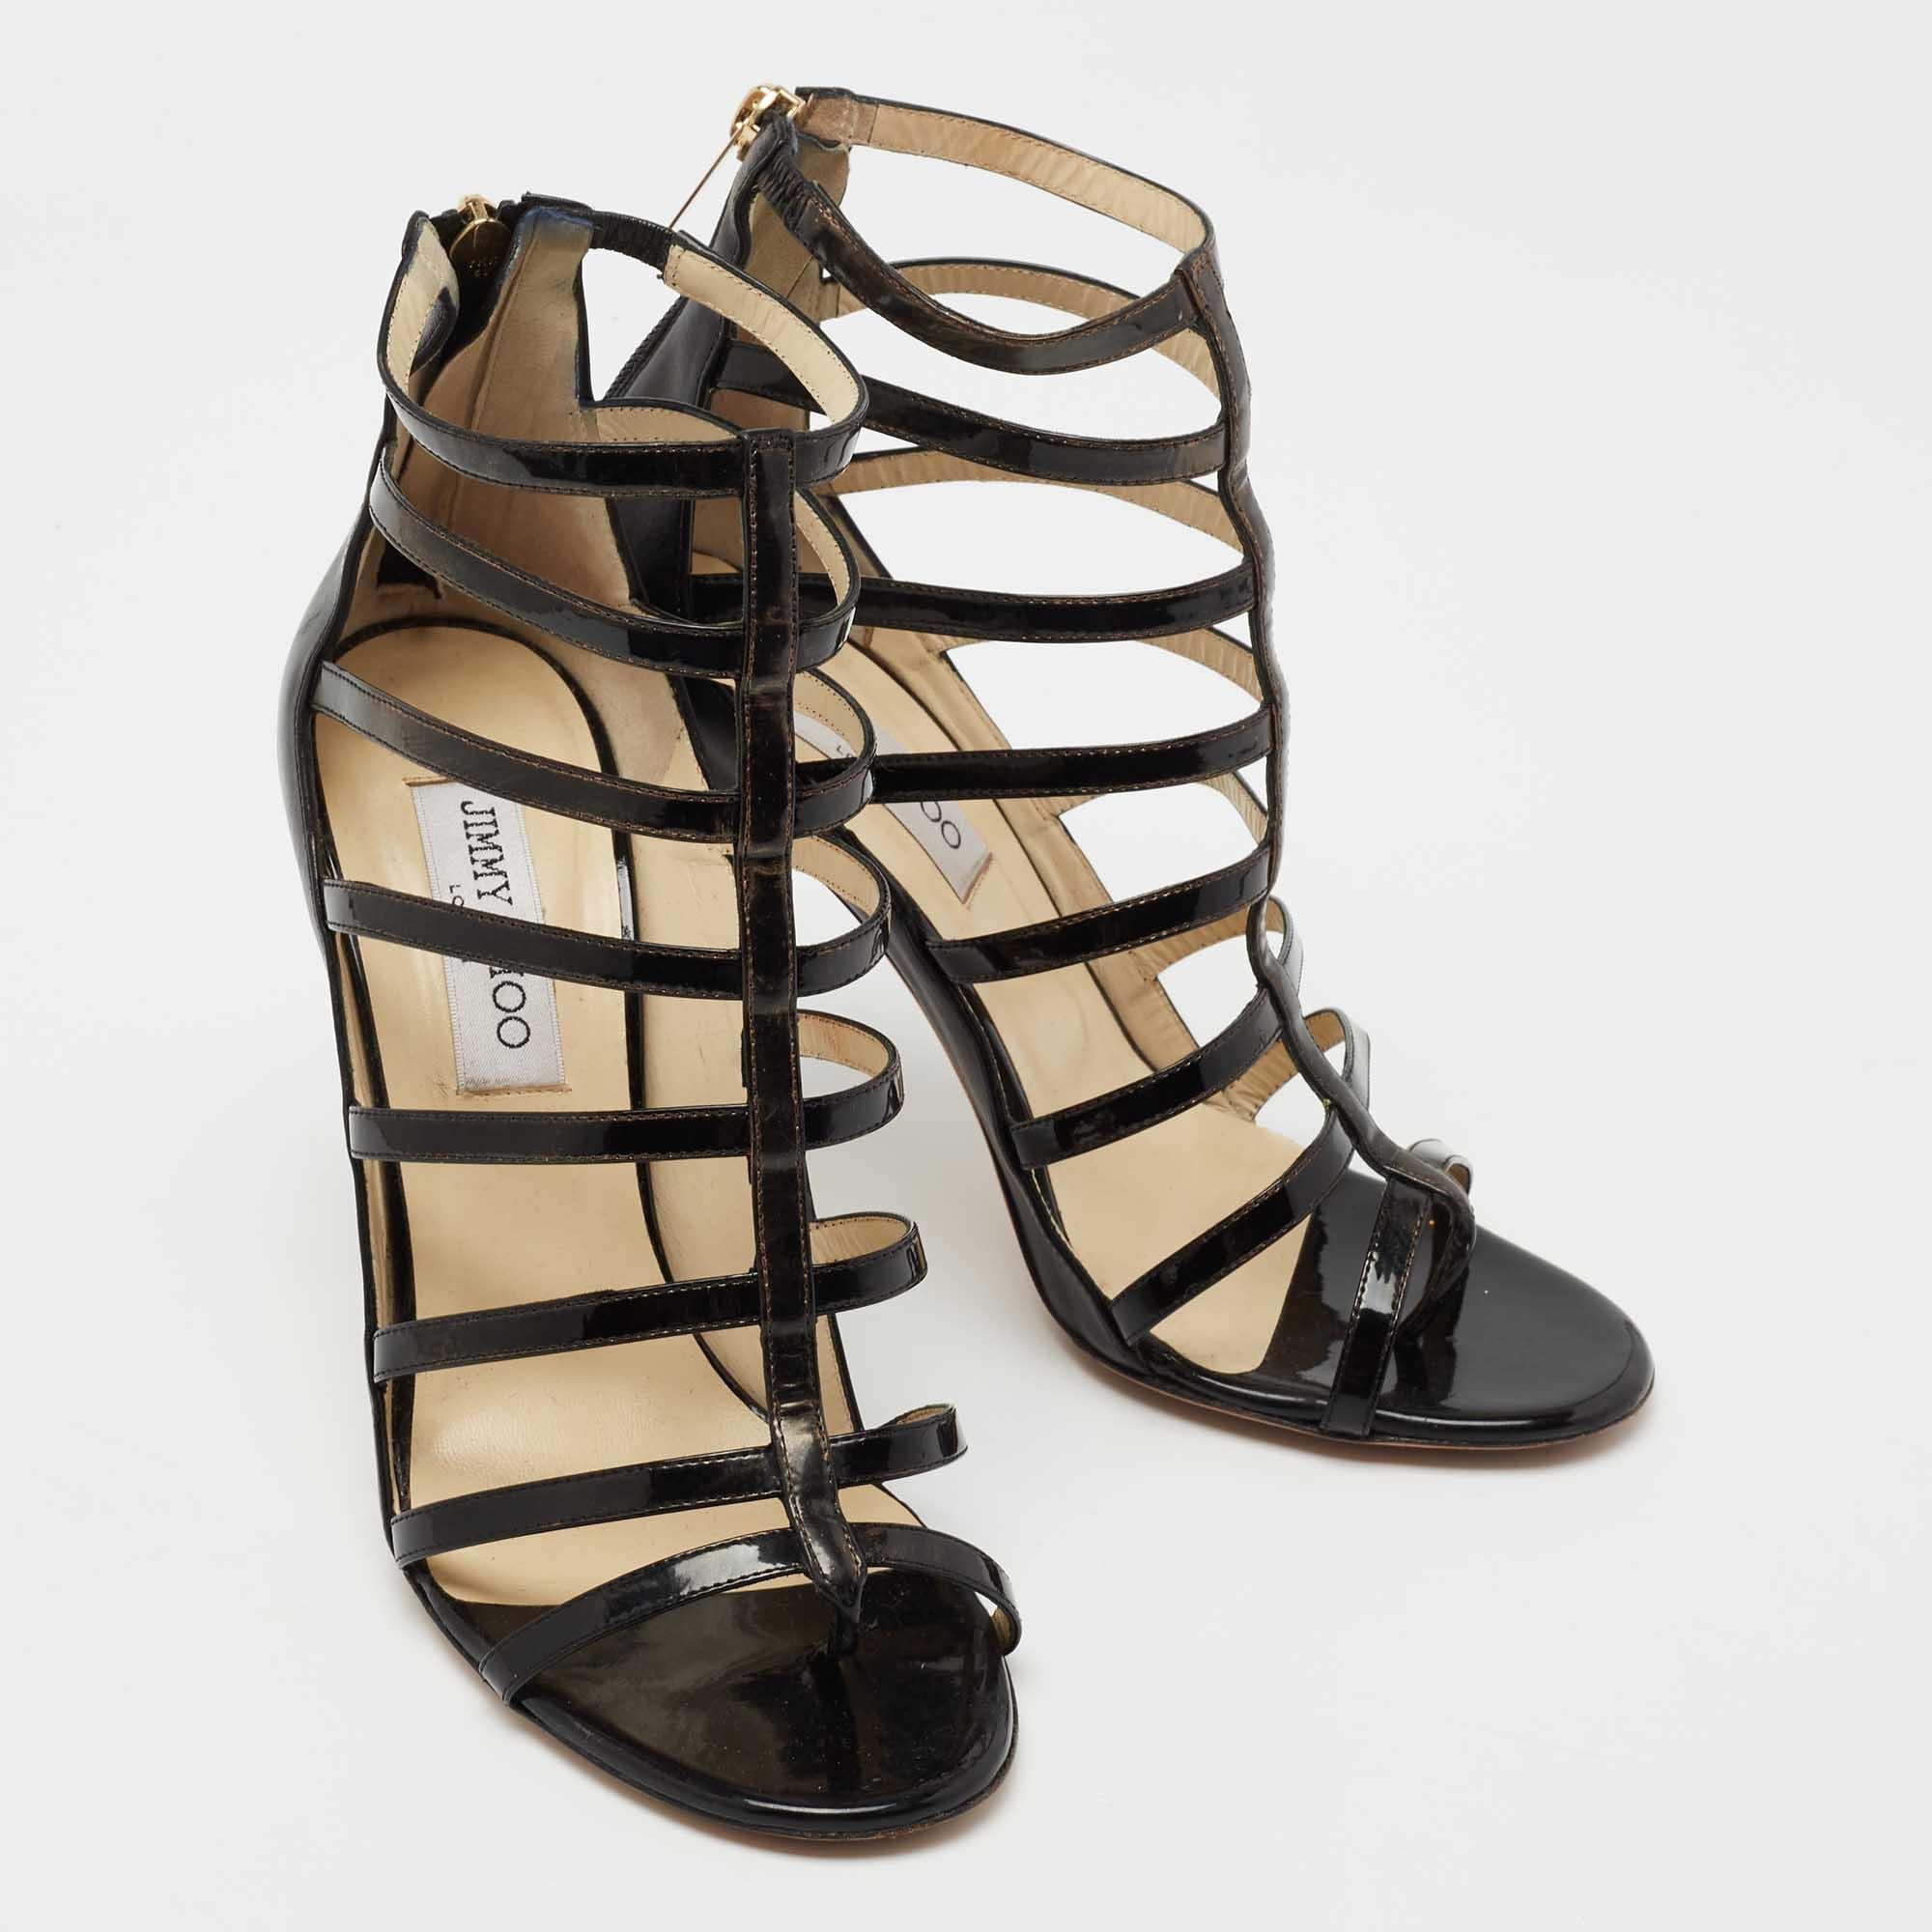 Jimmy Choo Black Patent Leather And Leather Gladiator Sandals Size 39.5 In Good Condition For Sale In Dubai, Al Qouz 2